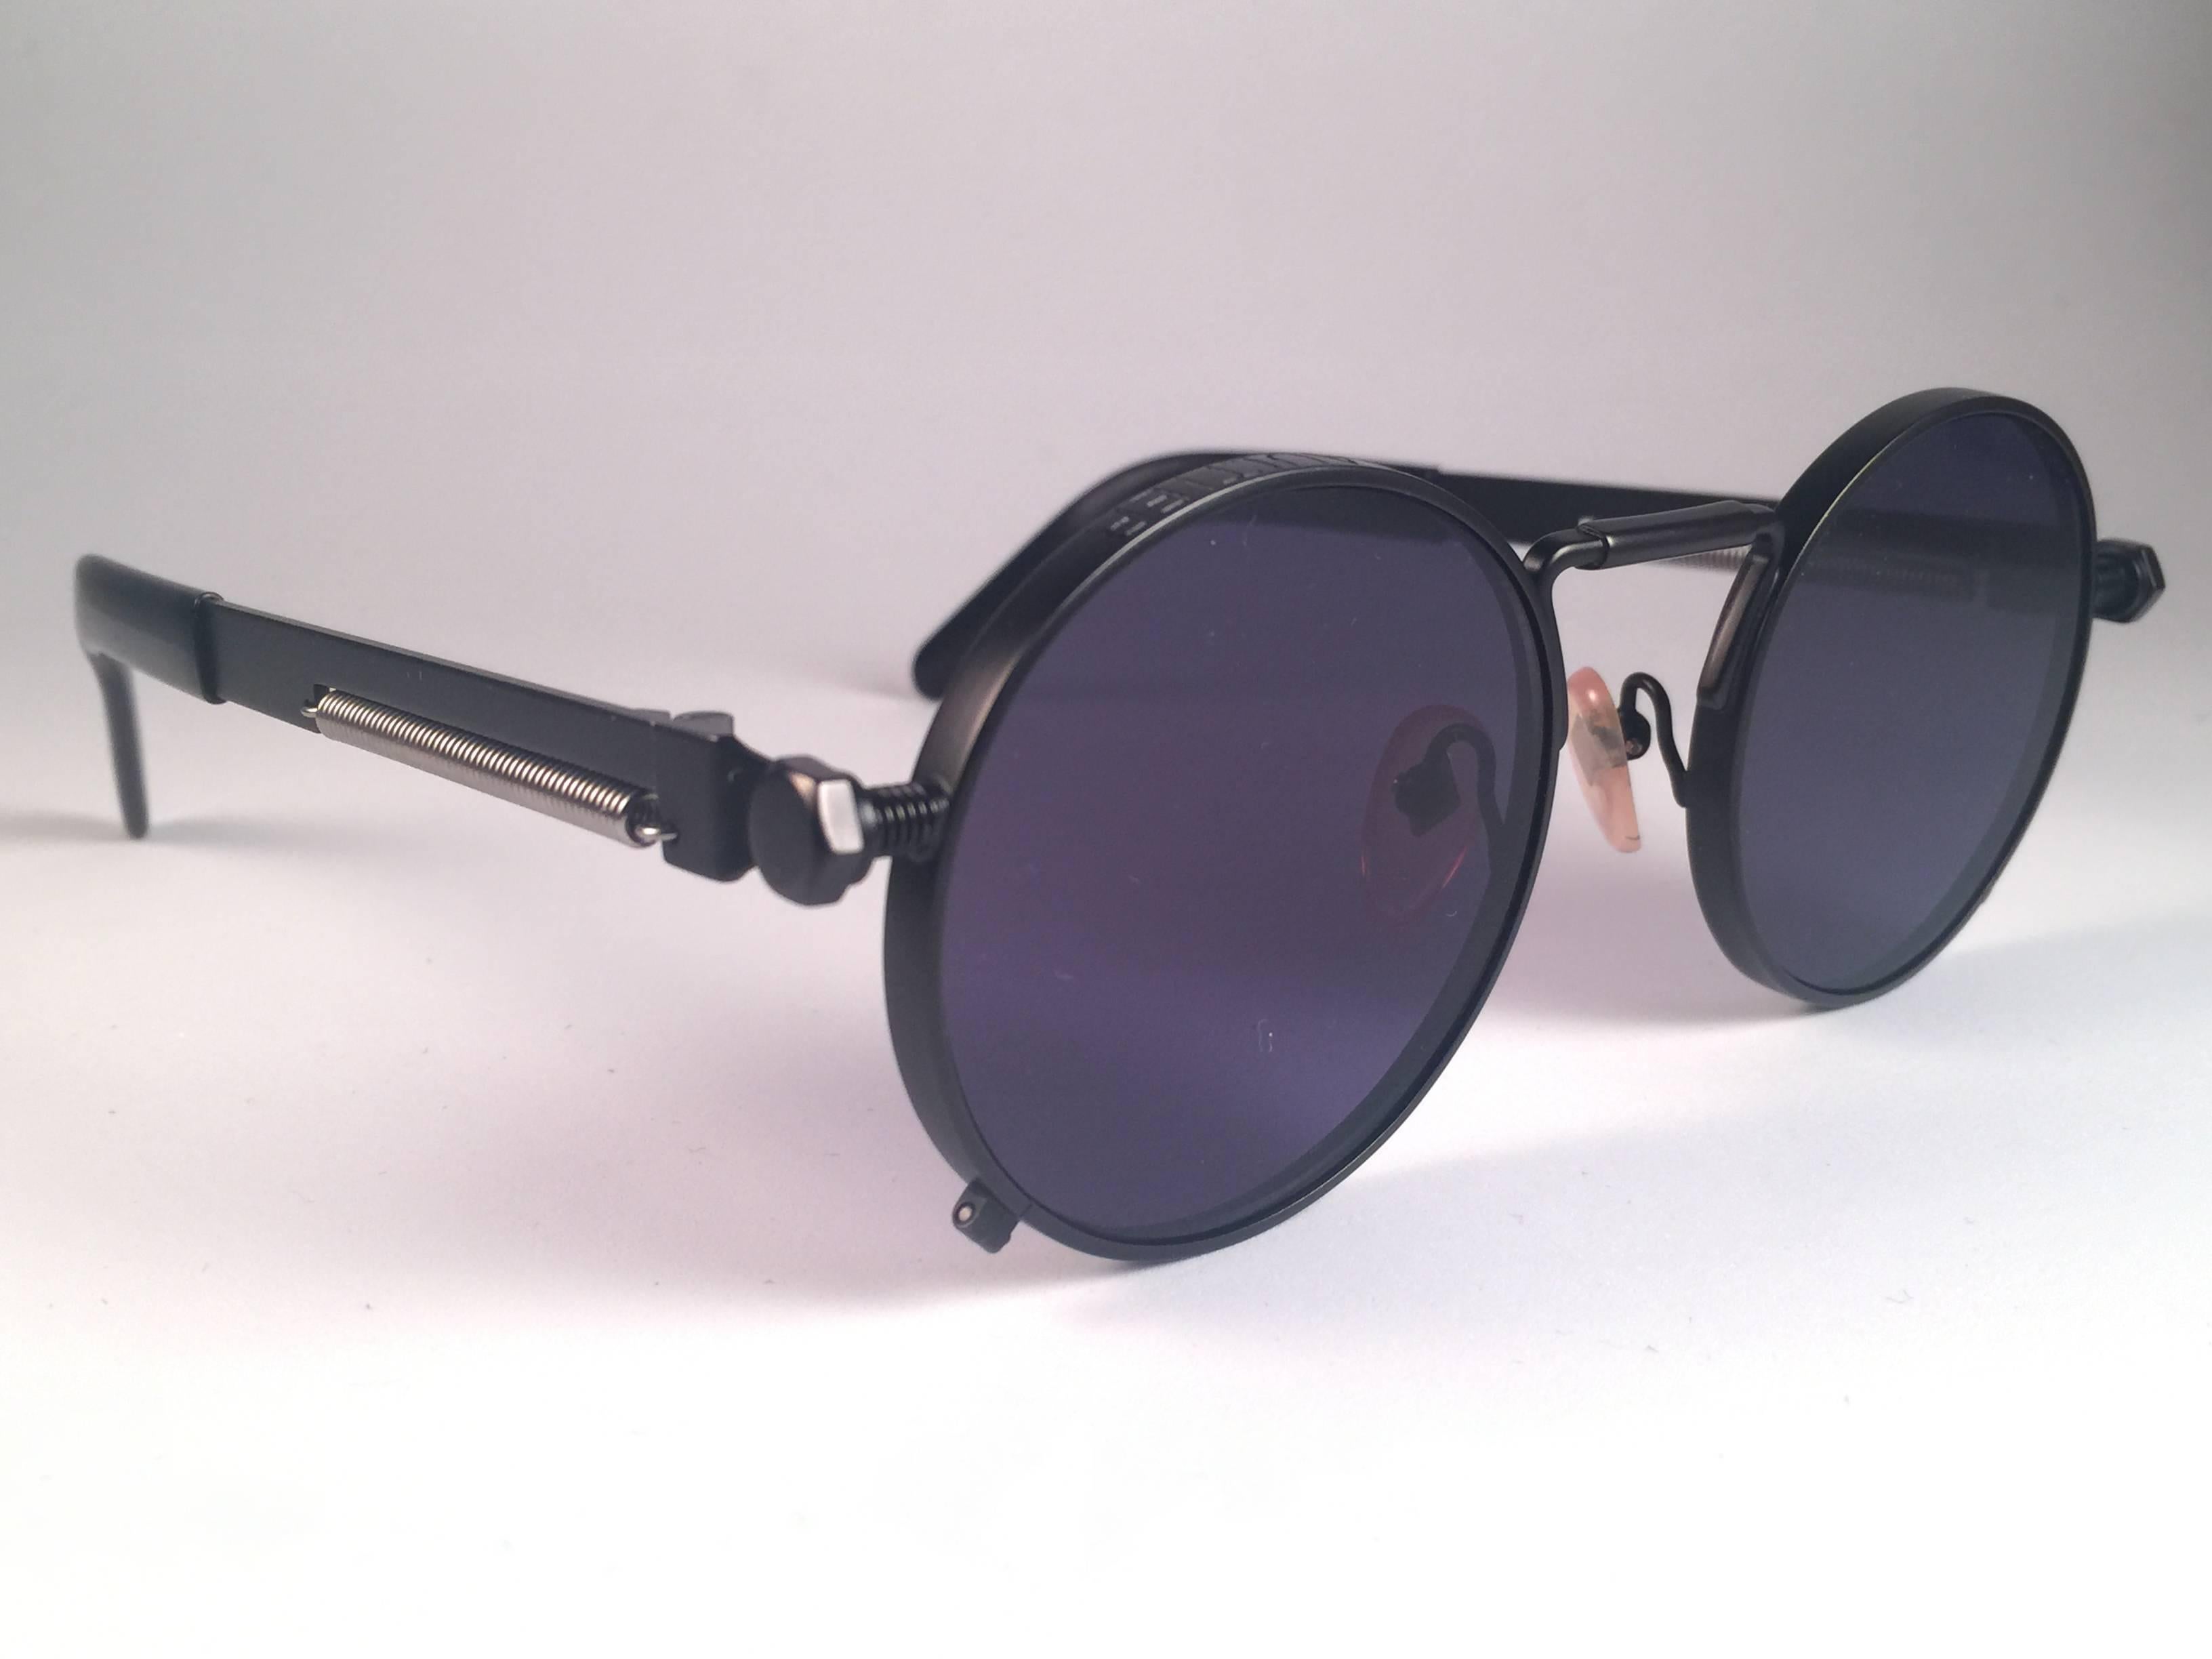 New Jean Paul Gaultier 56 8171 round black matte frame.  Flat dark purple lenses that complete a ready to wear JPG look.  Amazing design with strong yet intricate details. Design and produced in the 1900's. New, never worn or displayed. A true